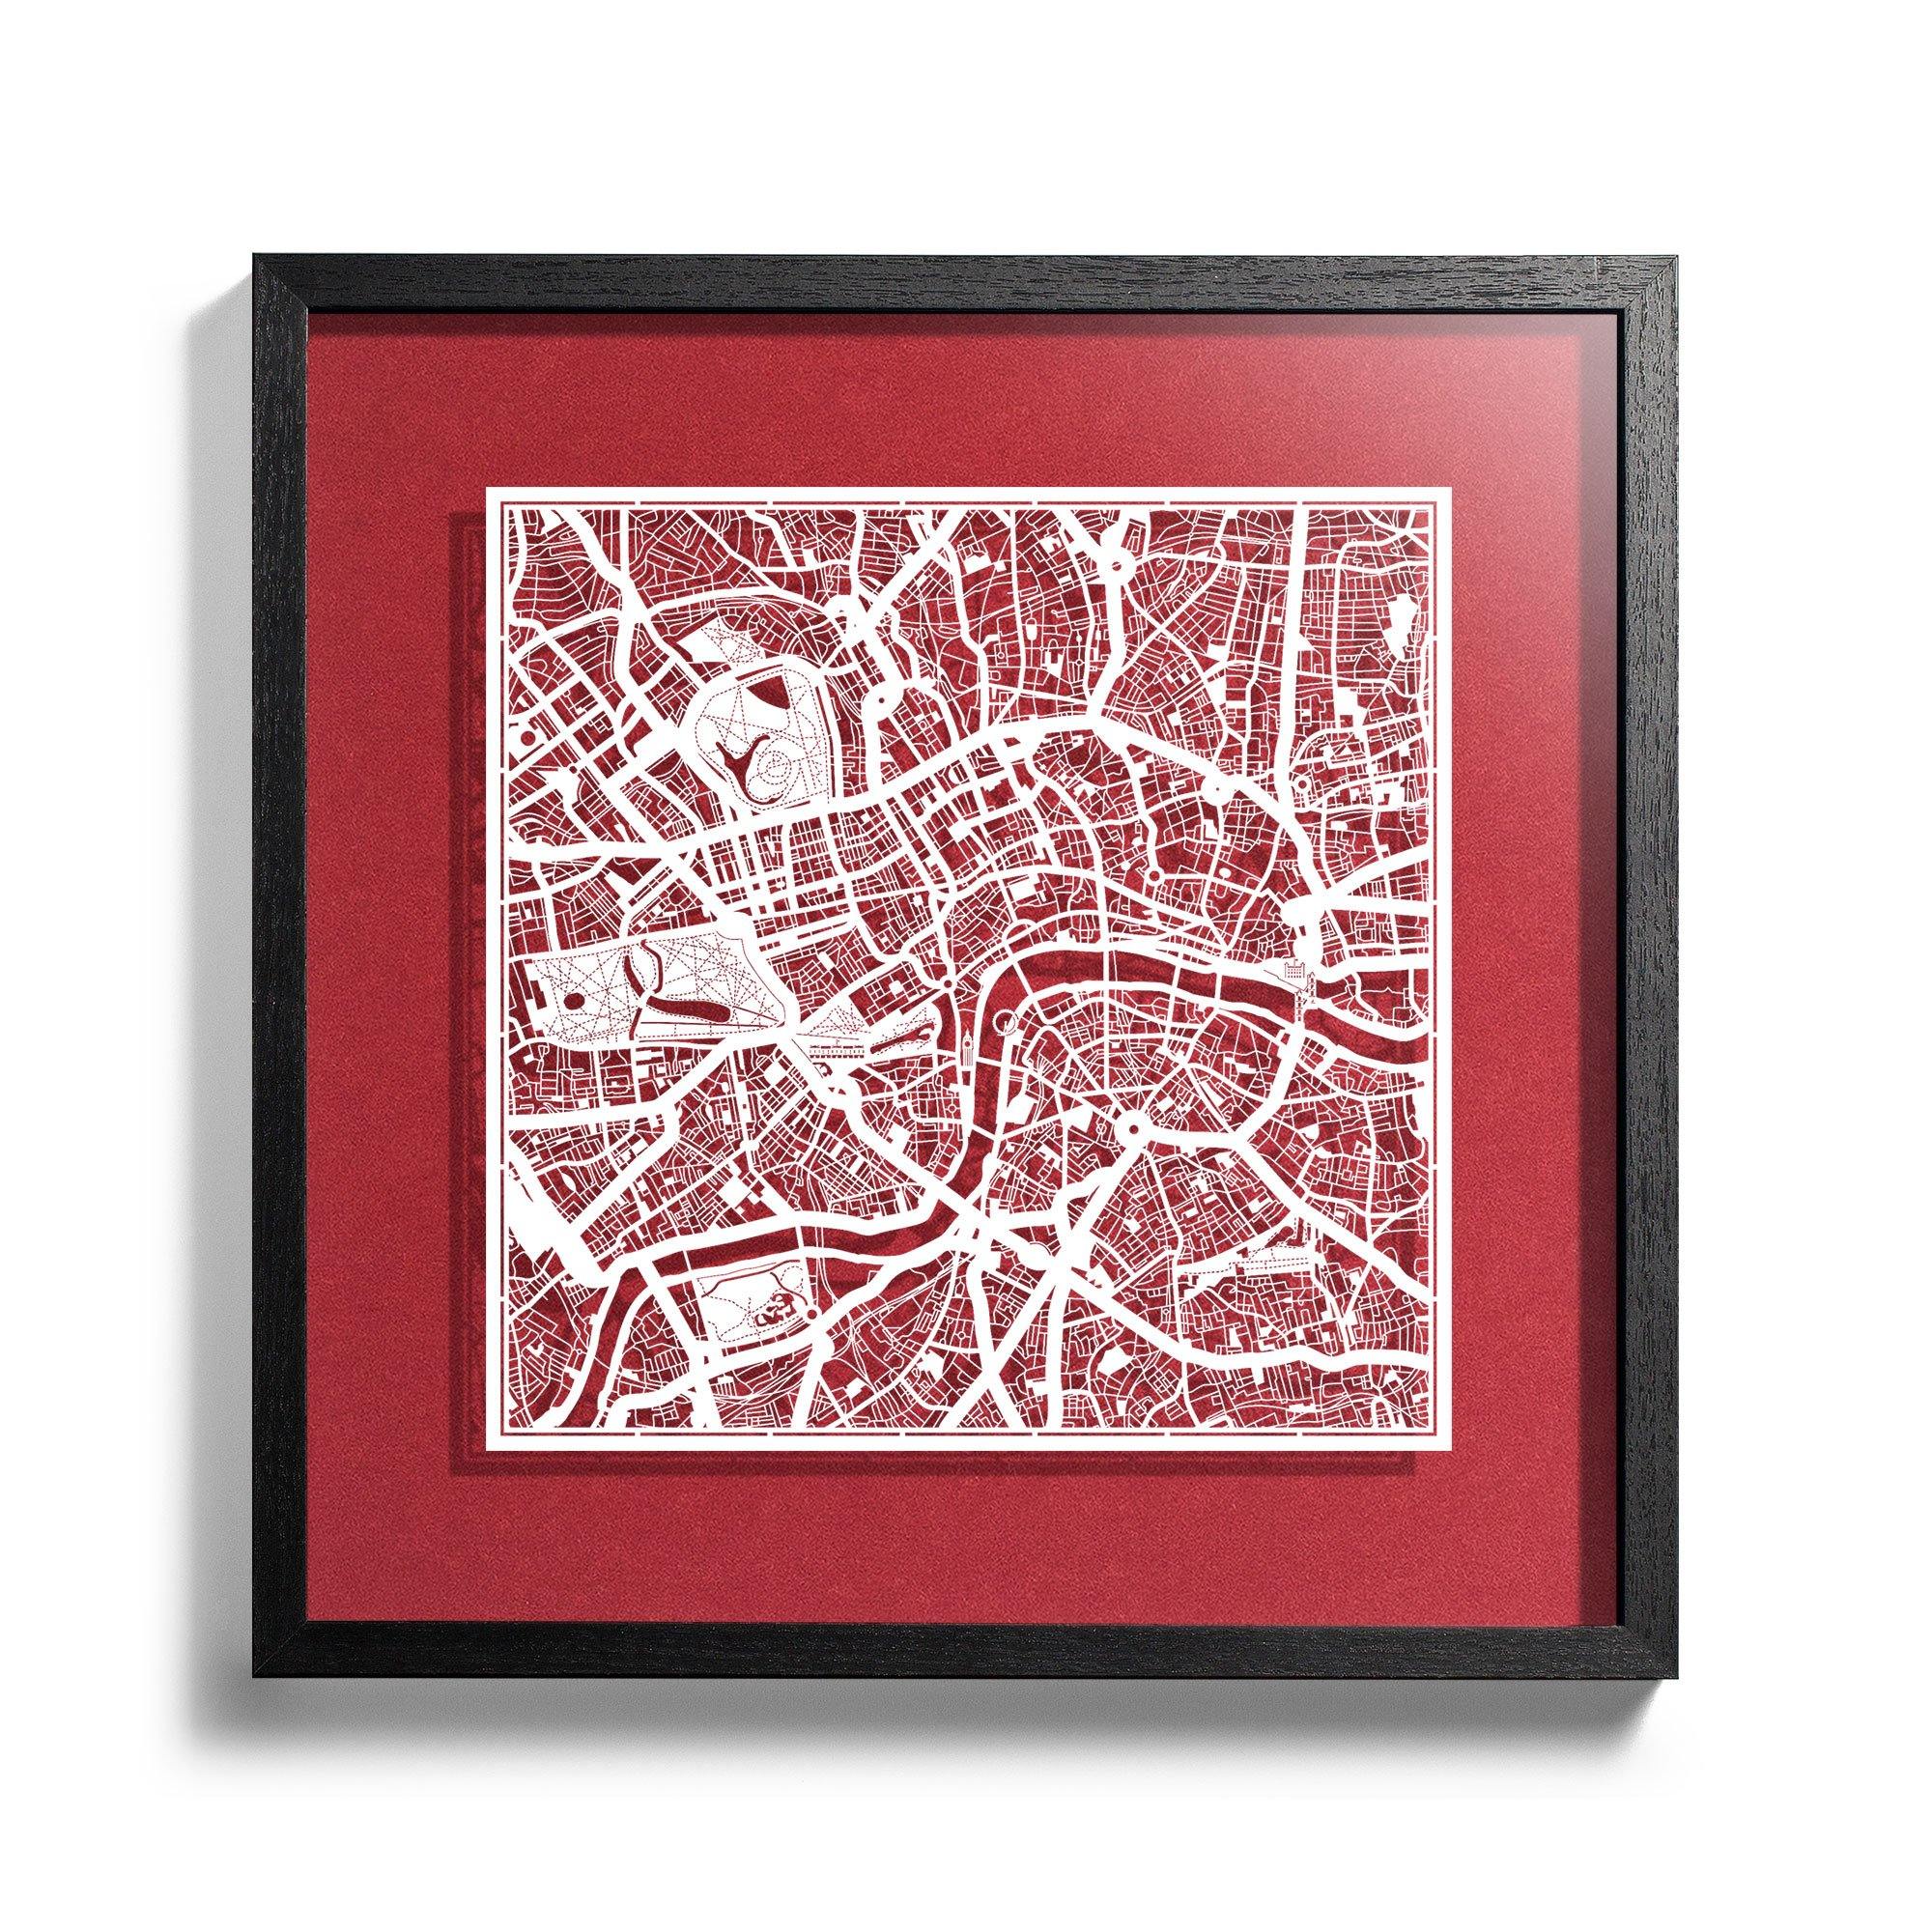 Paper cut maps framed, other cities 18 in - o3designstudio